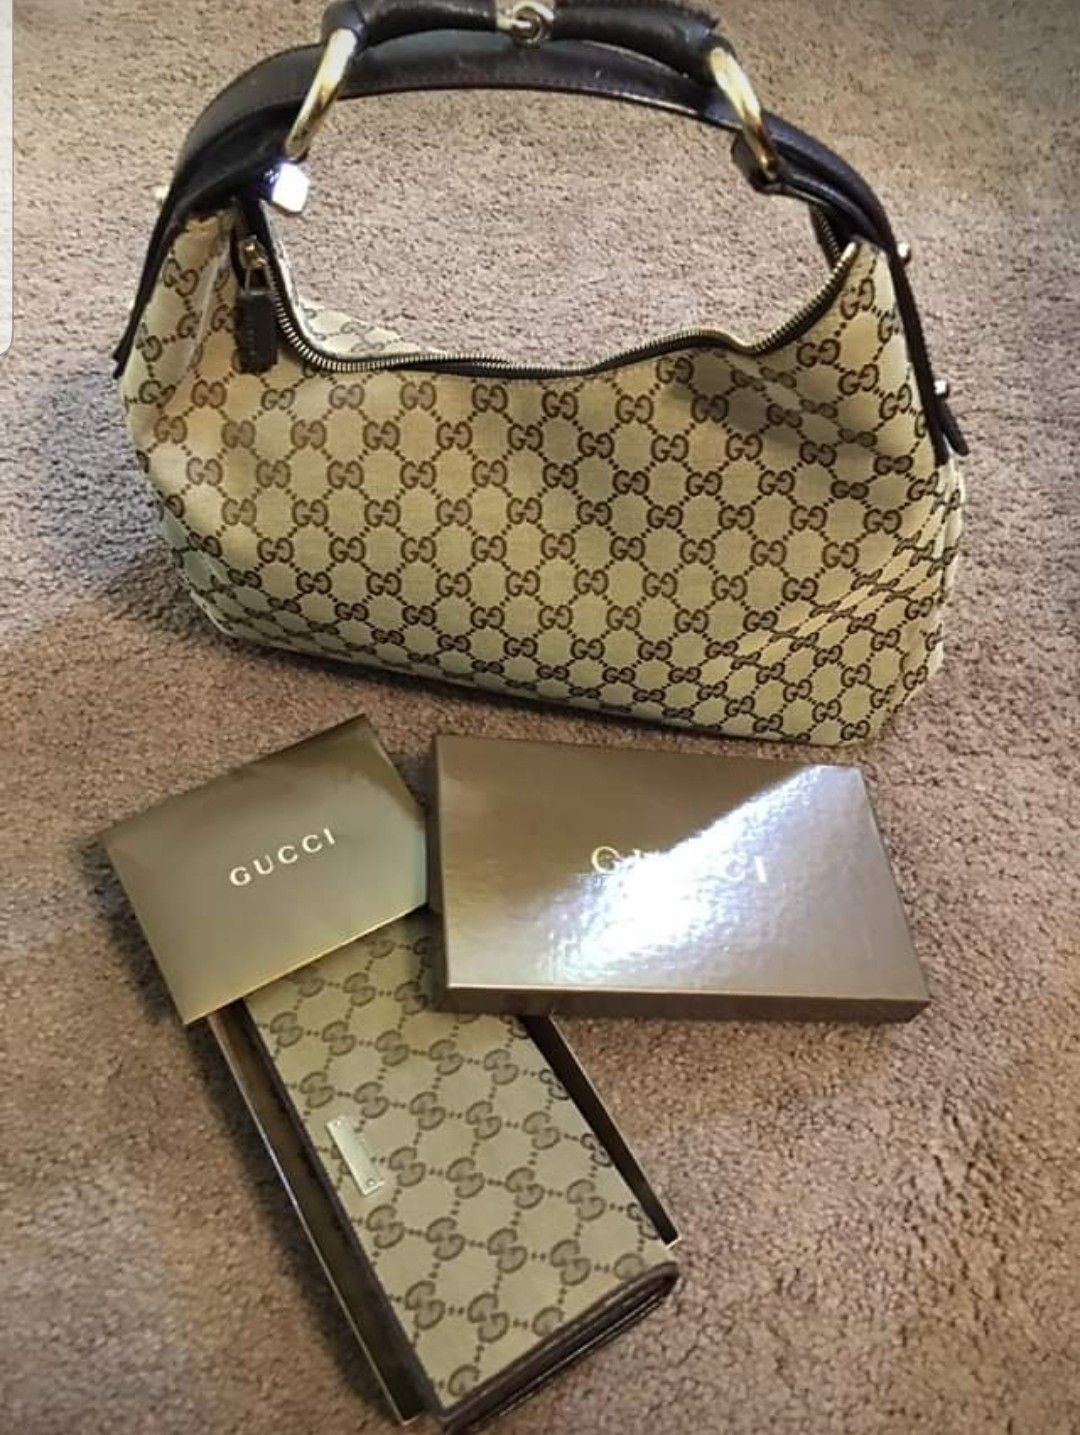 100% Authentic Gucci Wallet ONLY. GUCCI BAG IS NOT INCLUDED BUT YOU MAY BUY SEPARATELY.